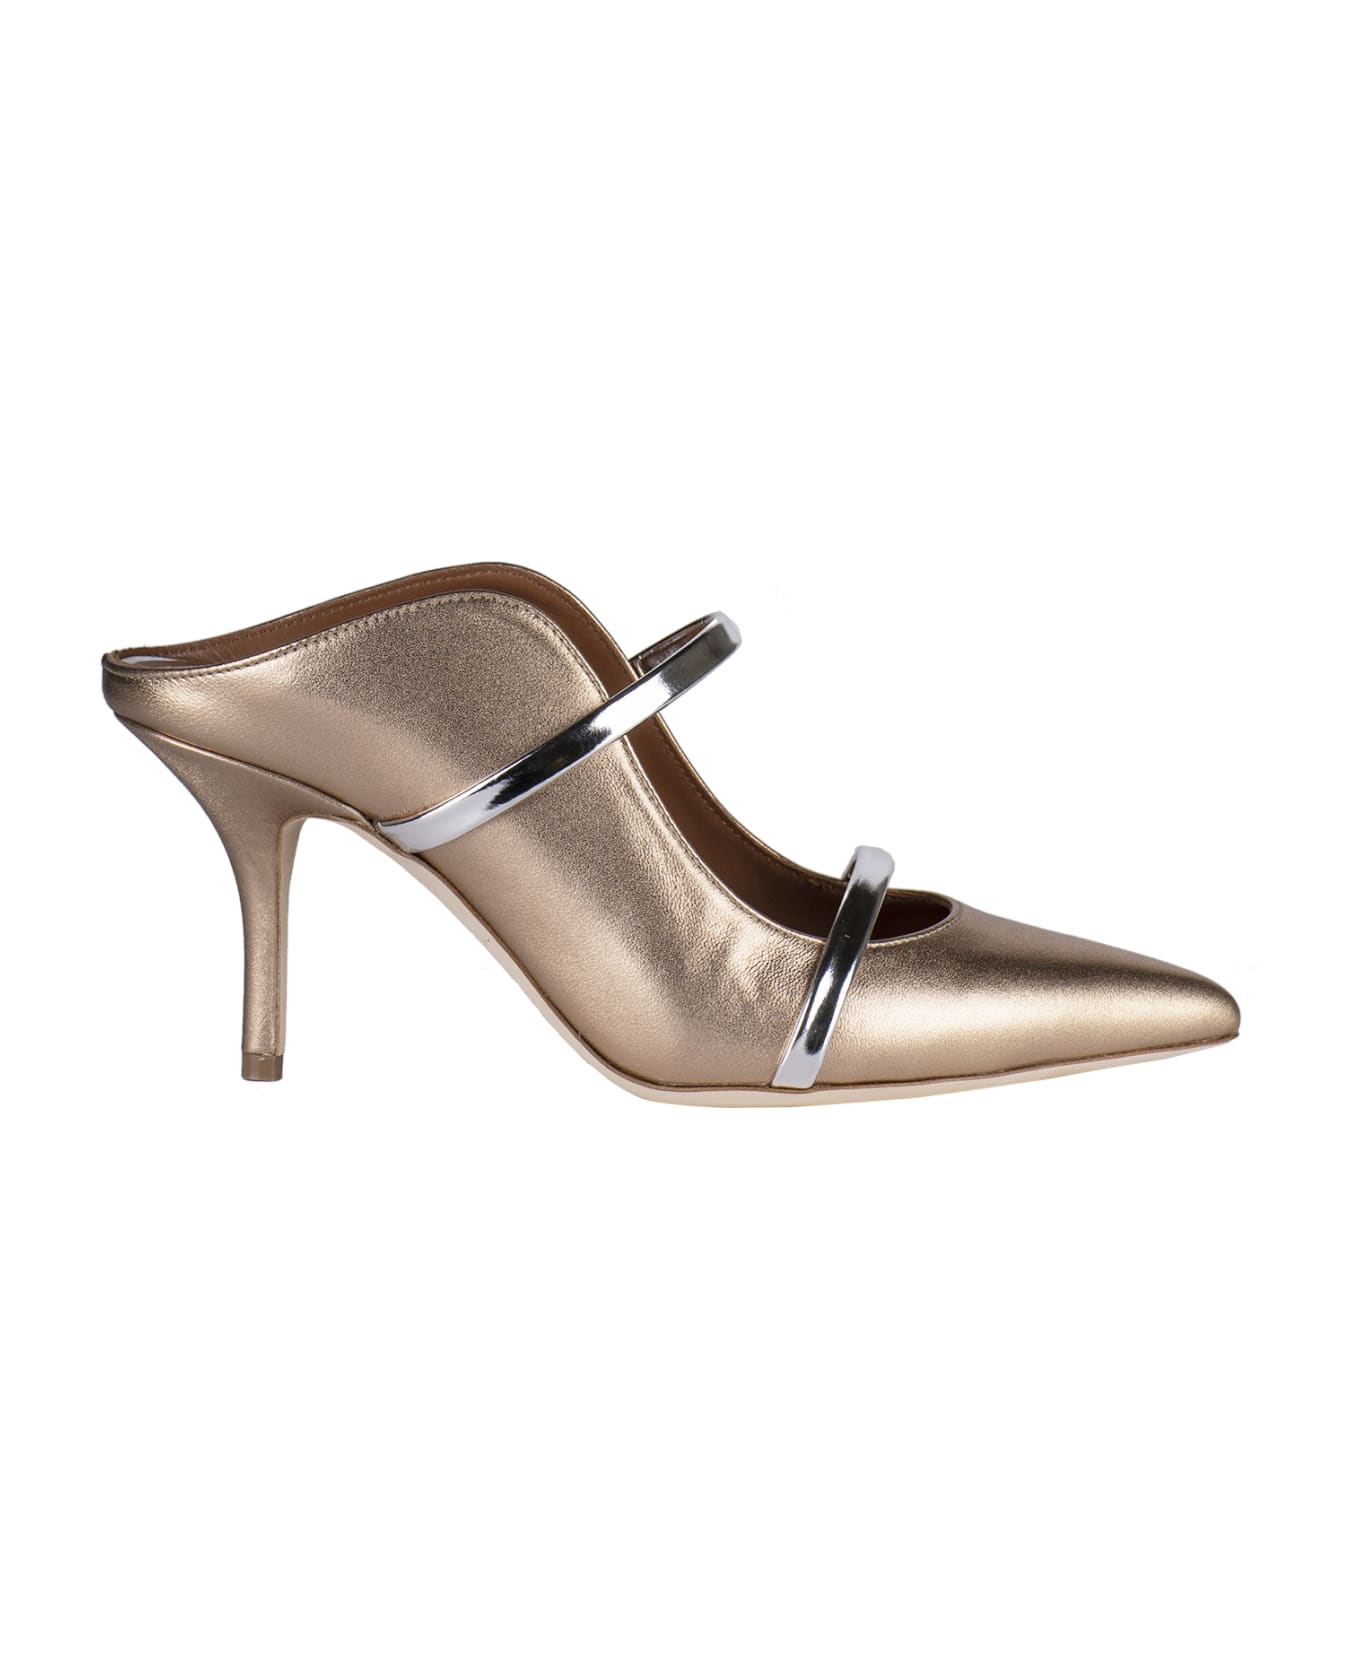 Malone Souliers Slip-on Pumps - Gold